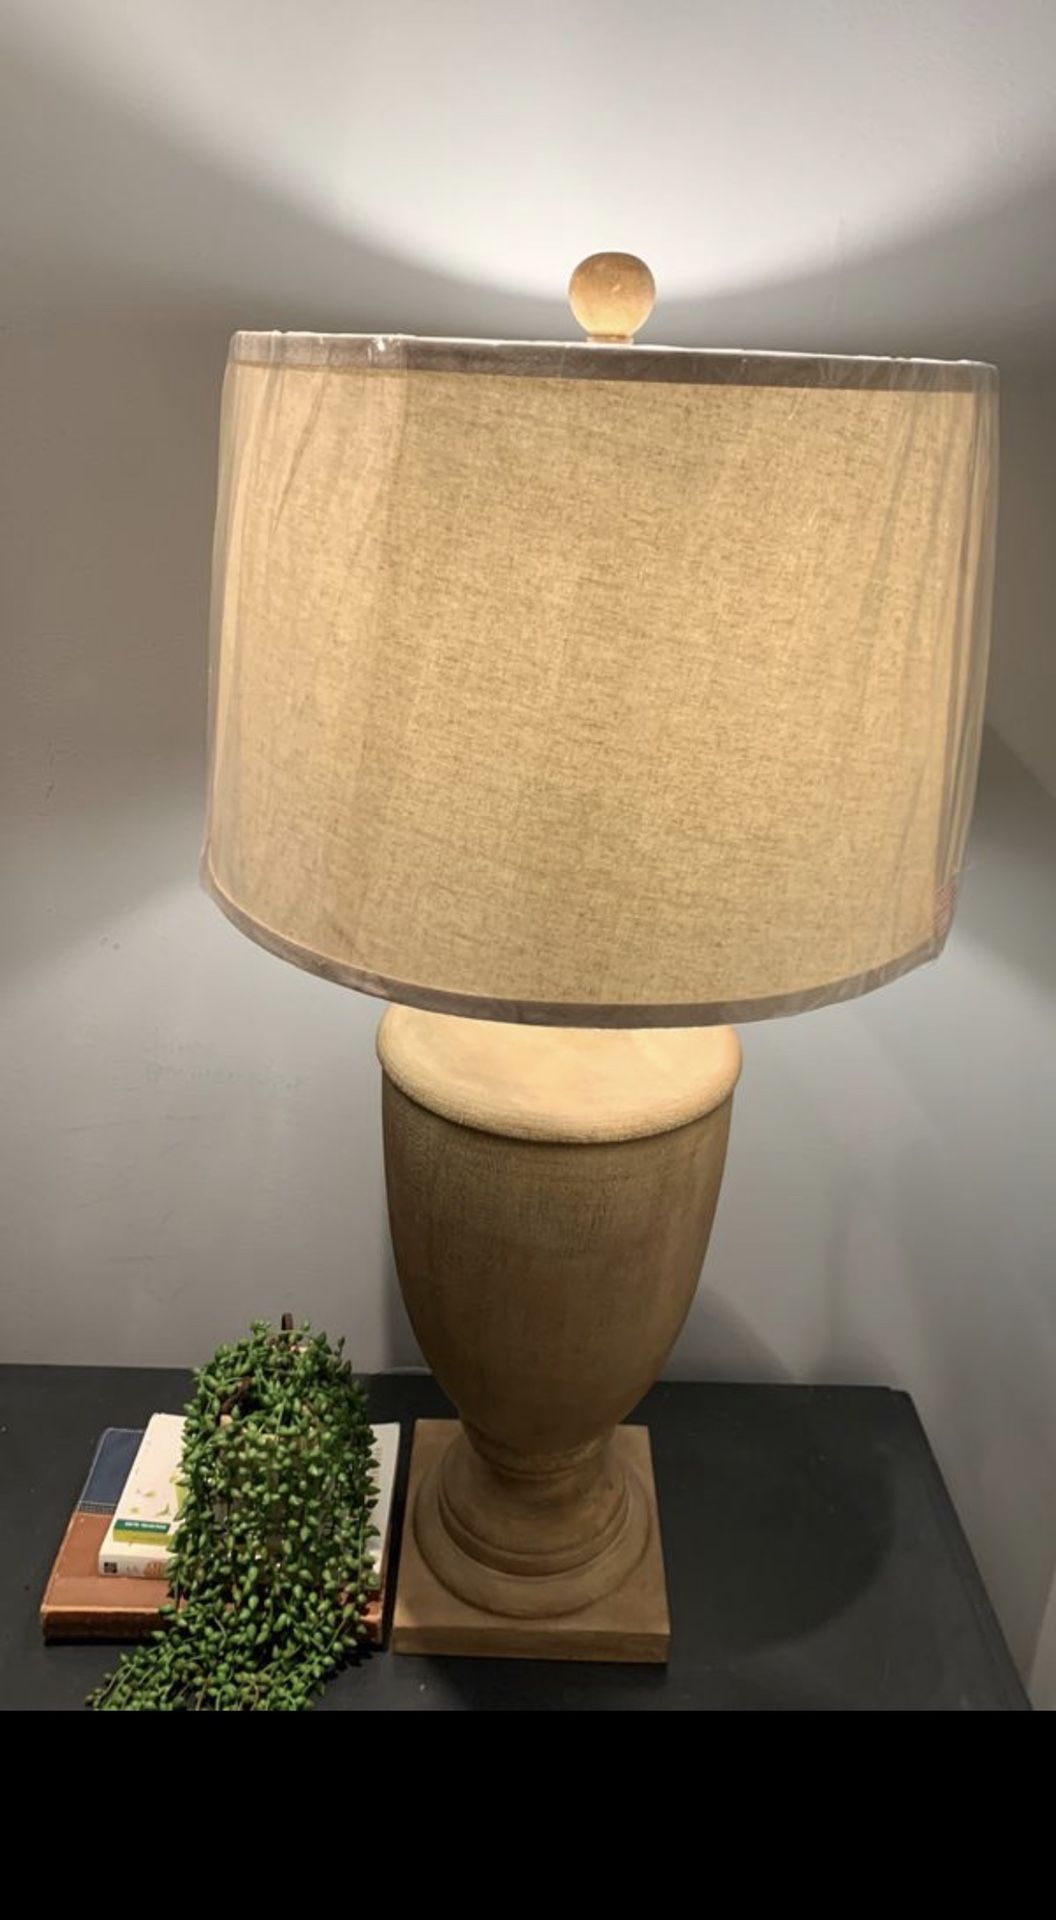 New, large lamp with shade